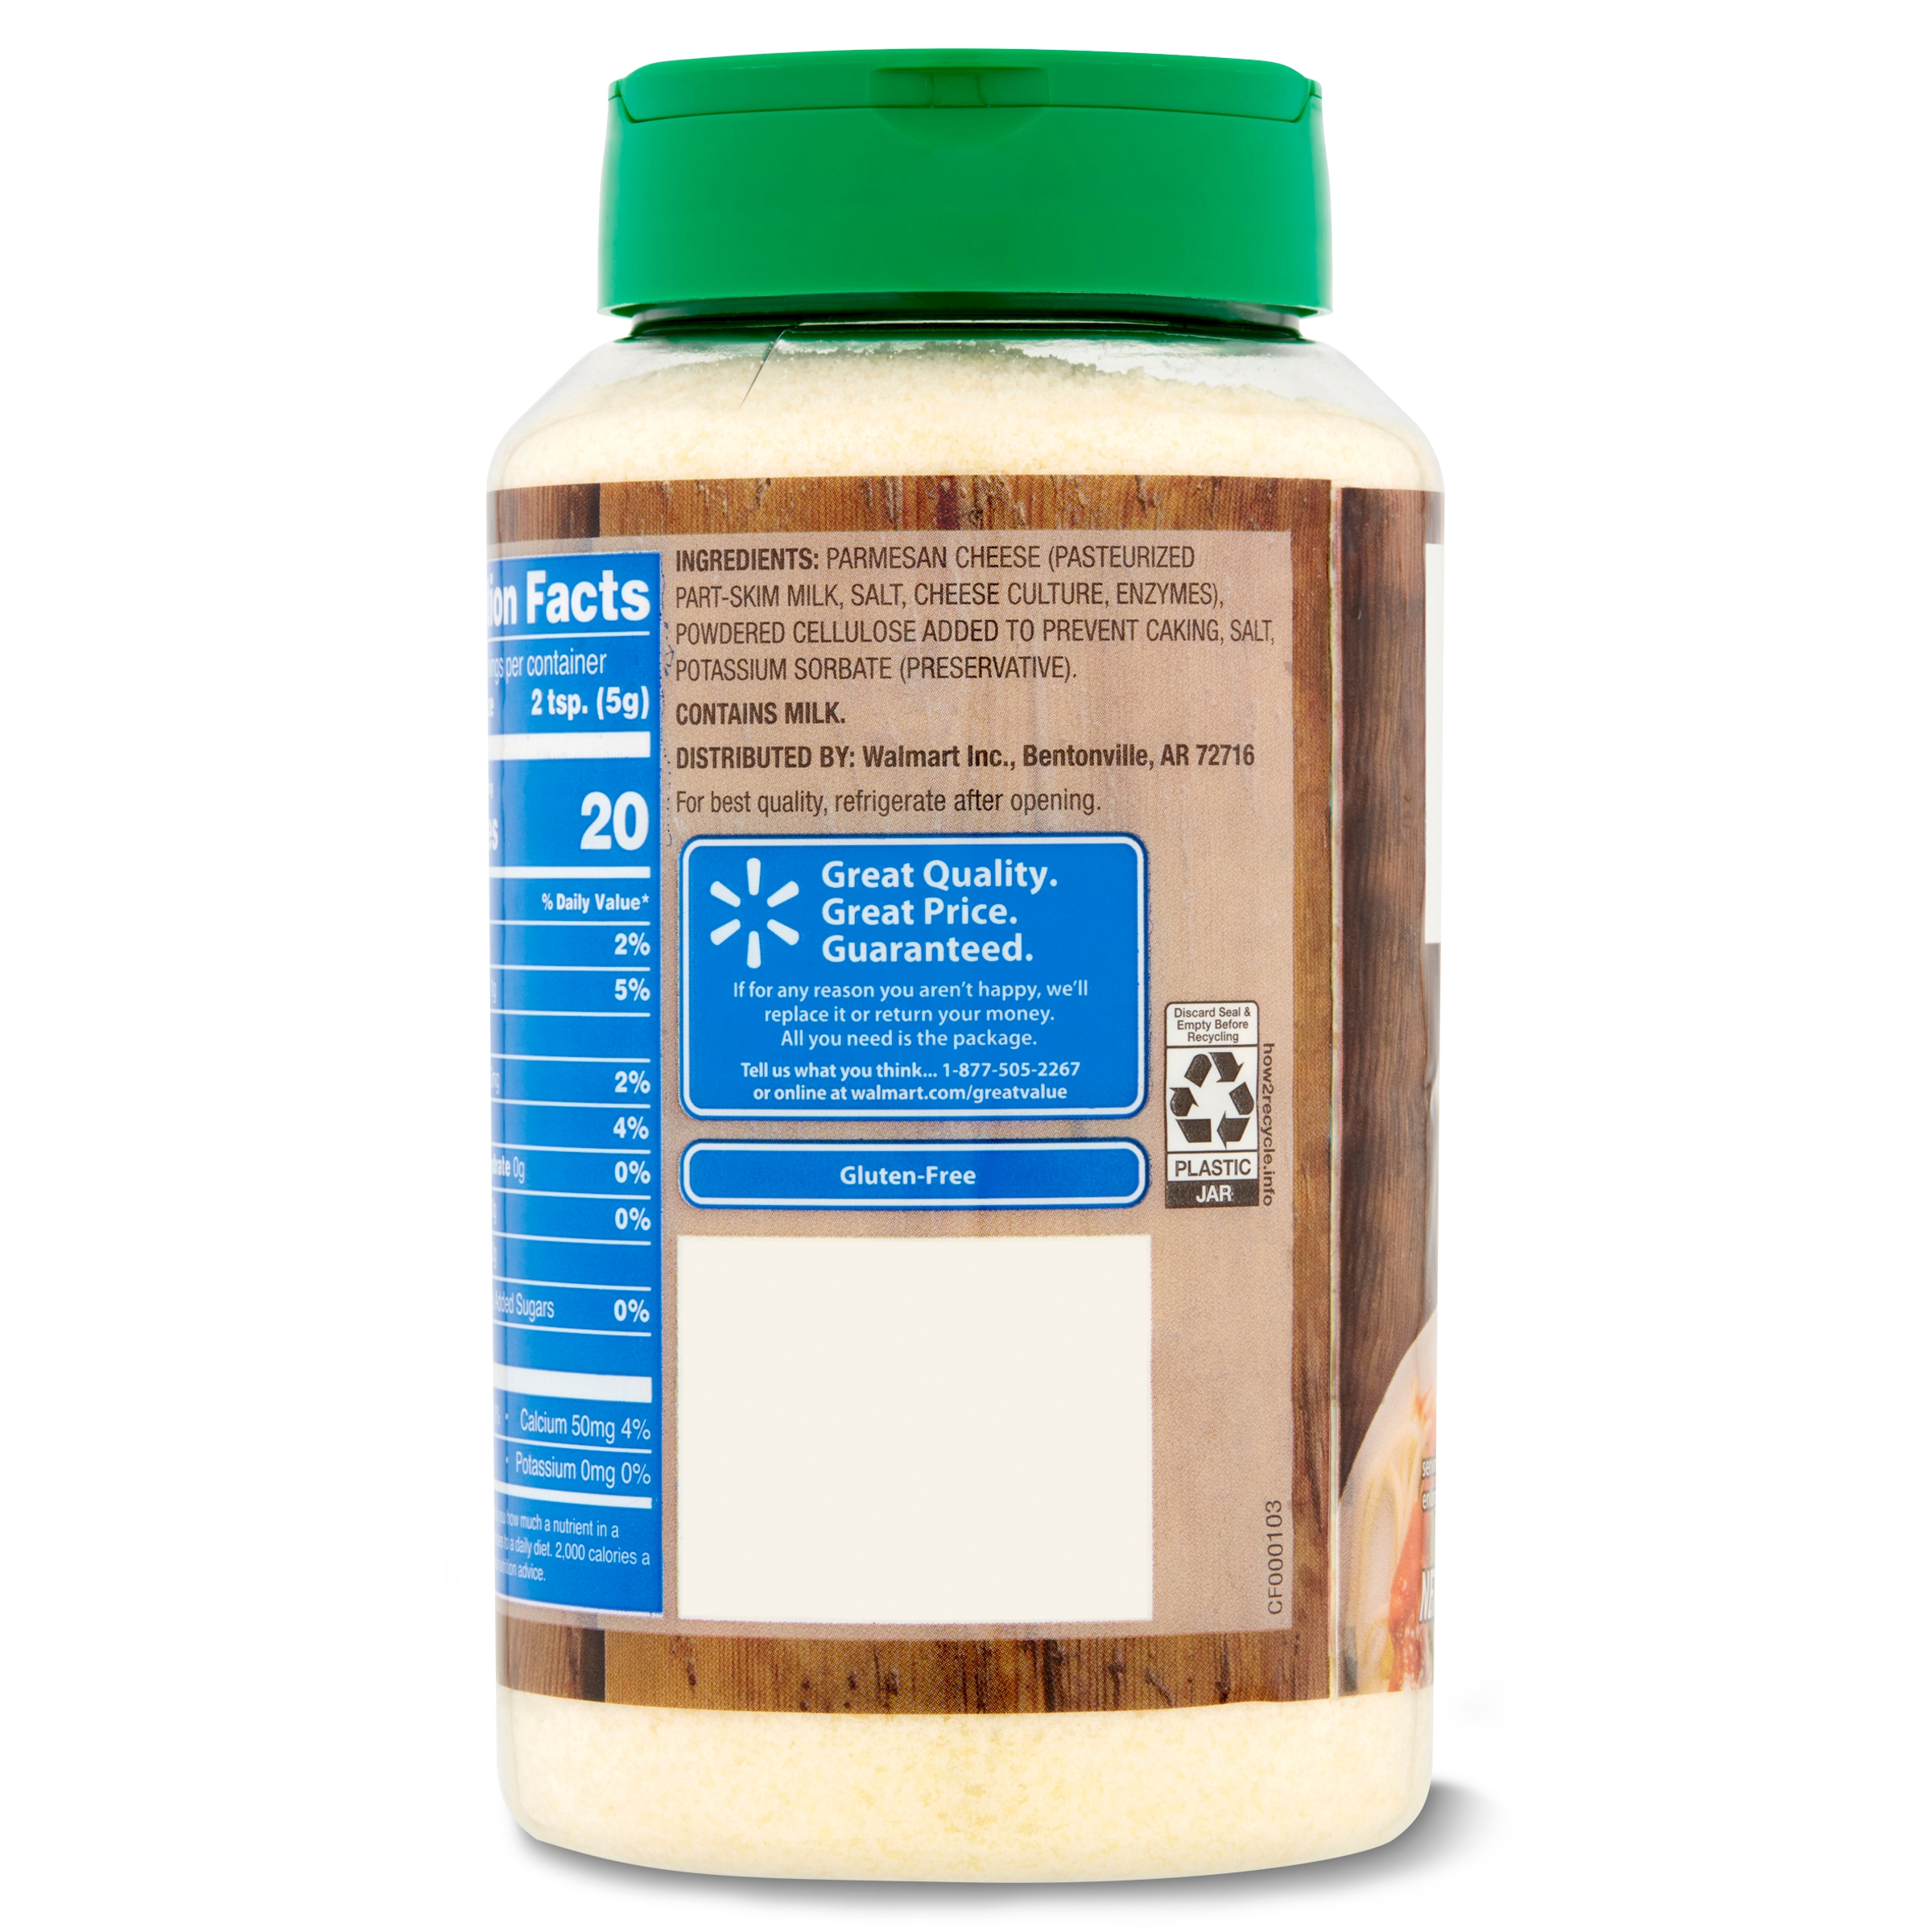 Great Value Grated Parmesan Cheese, 16 oz Bottle - image 5 of 7